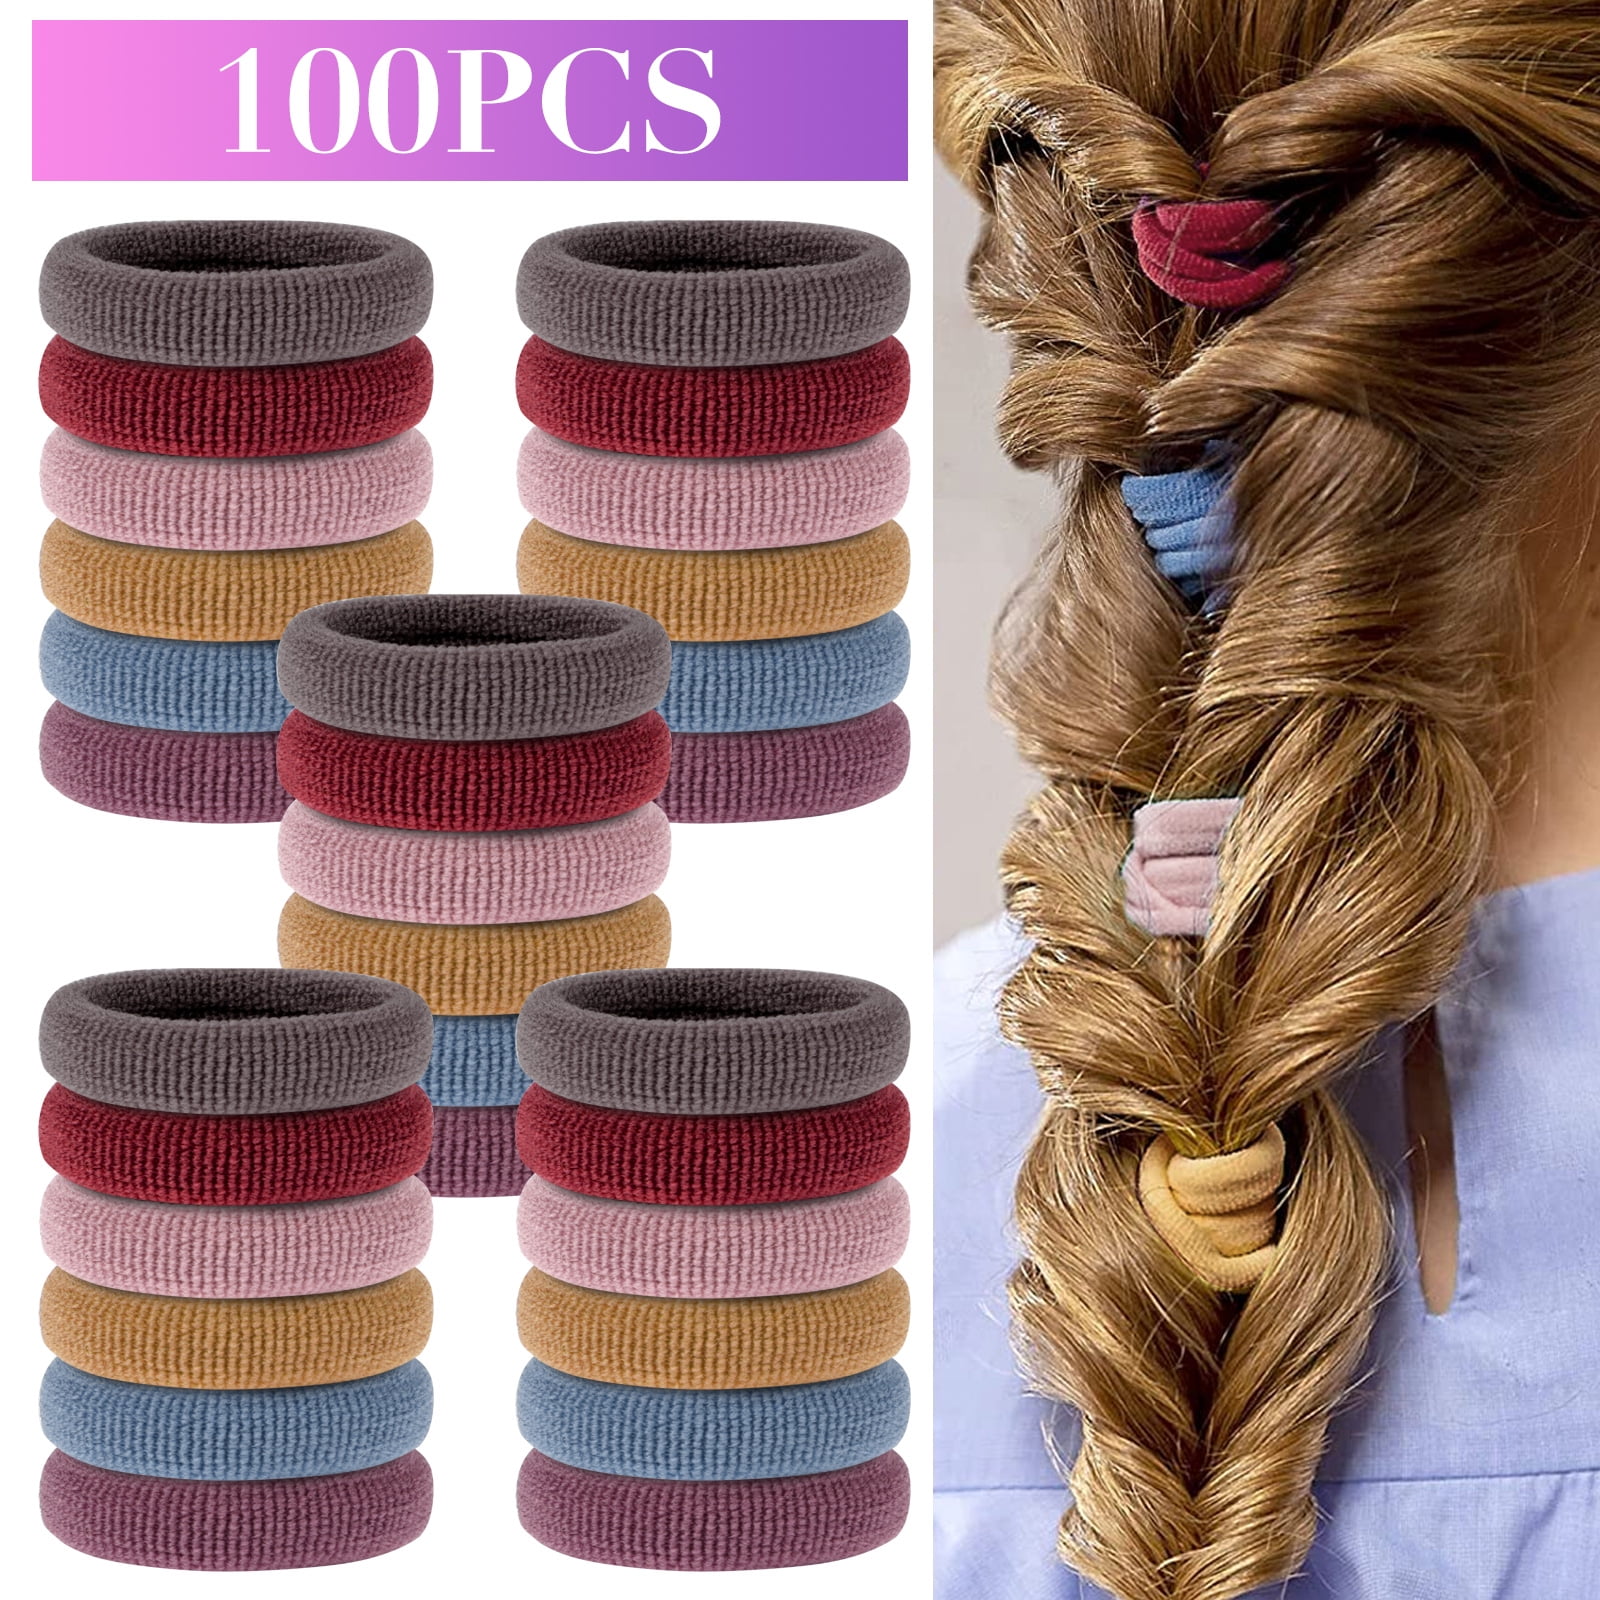 EEEkit 100pcs Mini Rubber Hair Bands for Girls, Soft Cotton Elastic Hair  Ties, Seamless Hairbands Ponytail Holders for Kids Hair, Braids Hair,  Wedding Hairstyle, Black/Multicolor 